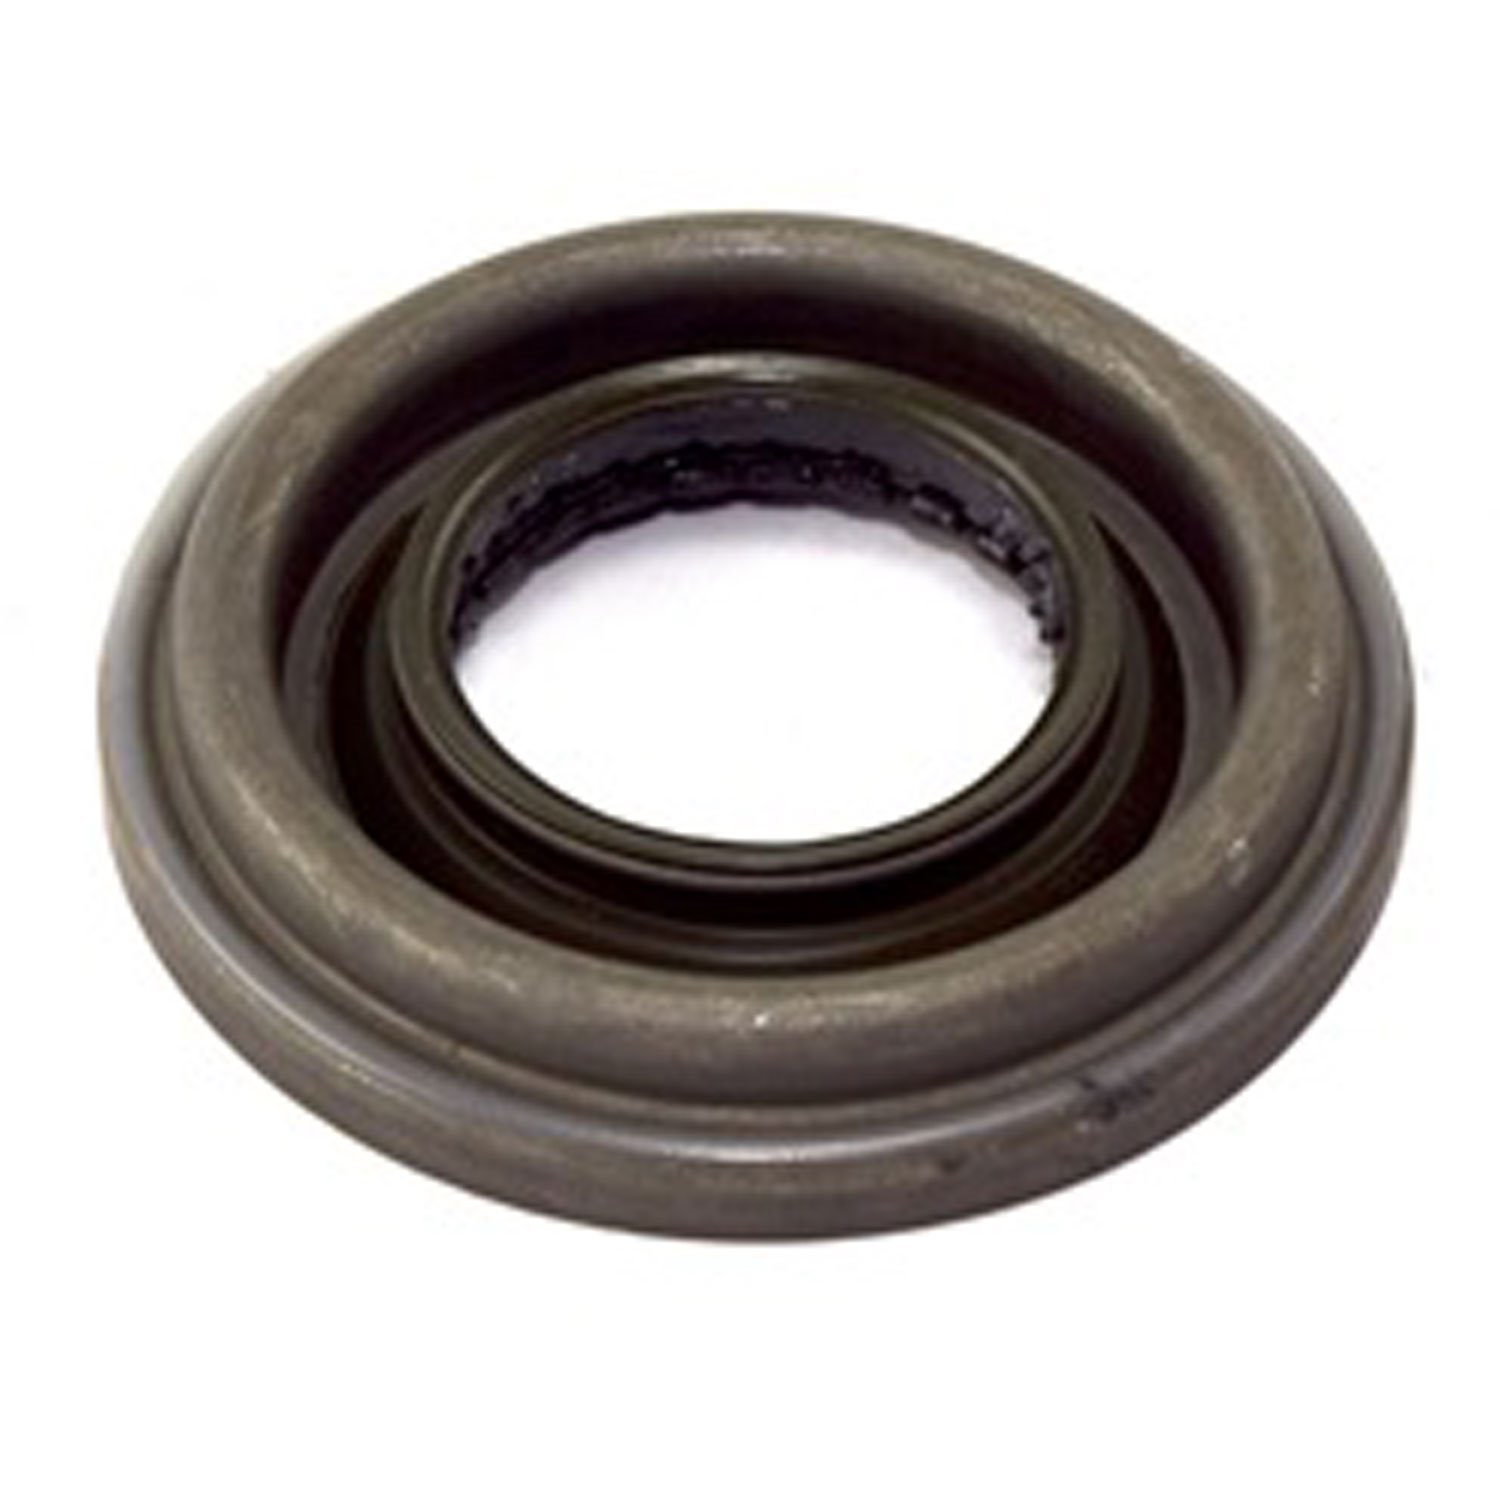 This pinion oil seal from Omix-ADA fits the Dana 44 rear axle in 72-75 Jeep CJ-5s and 1986 CJ-7/CJ-8